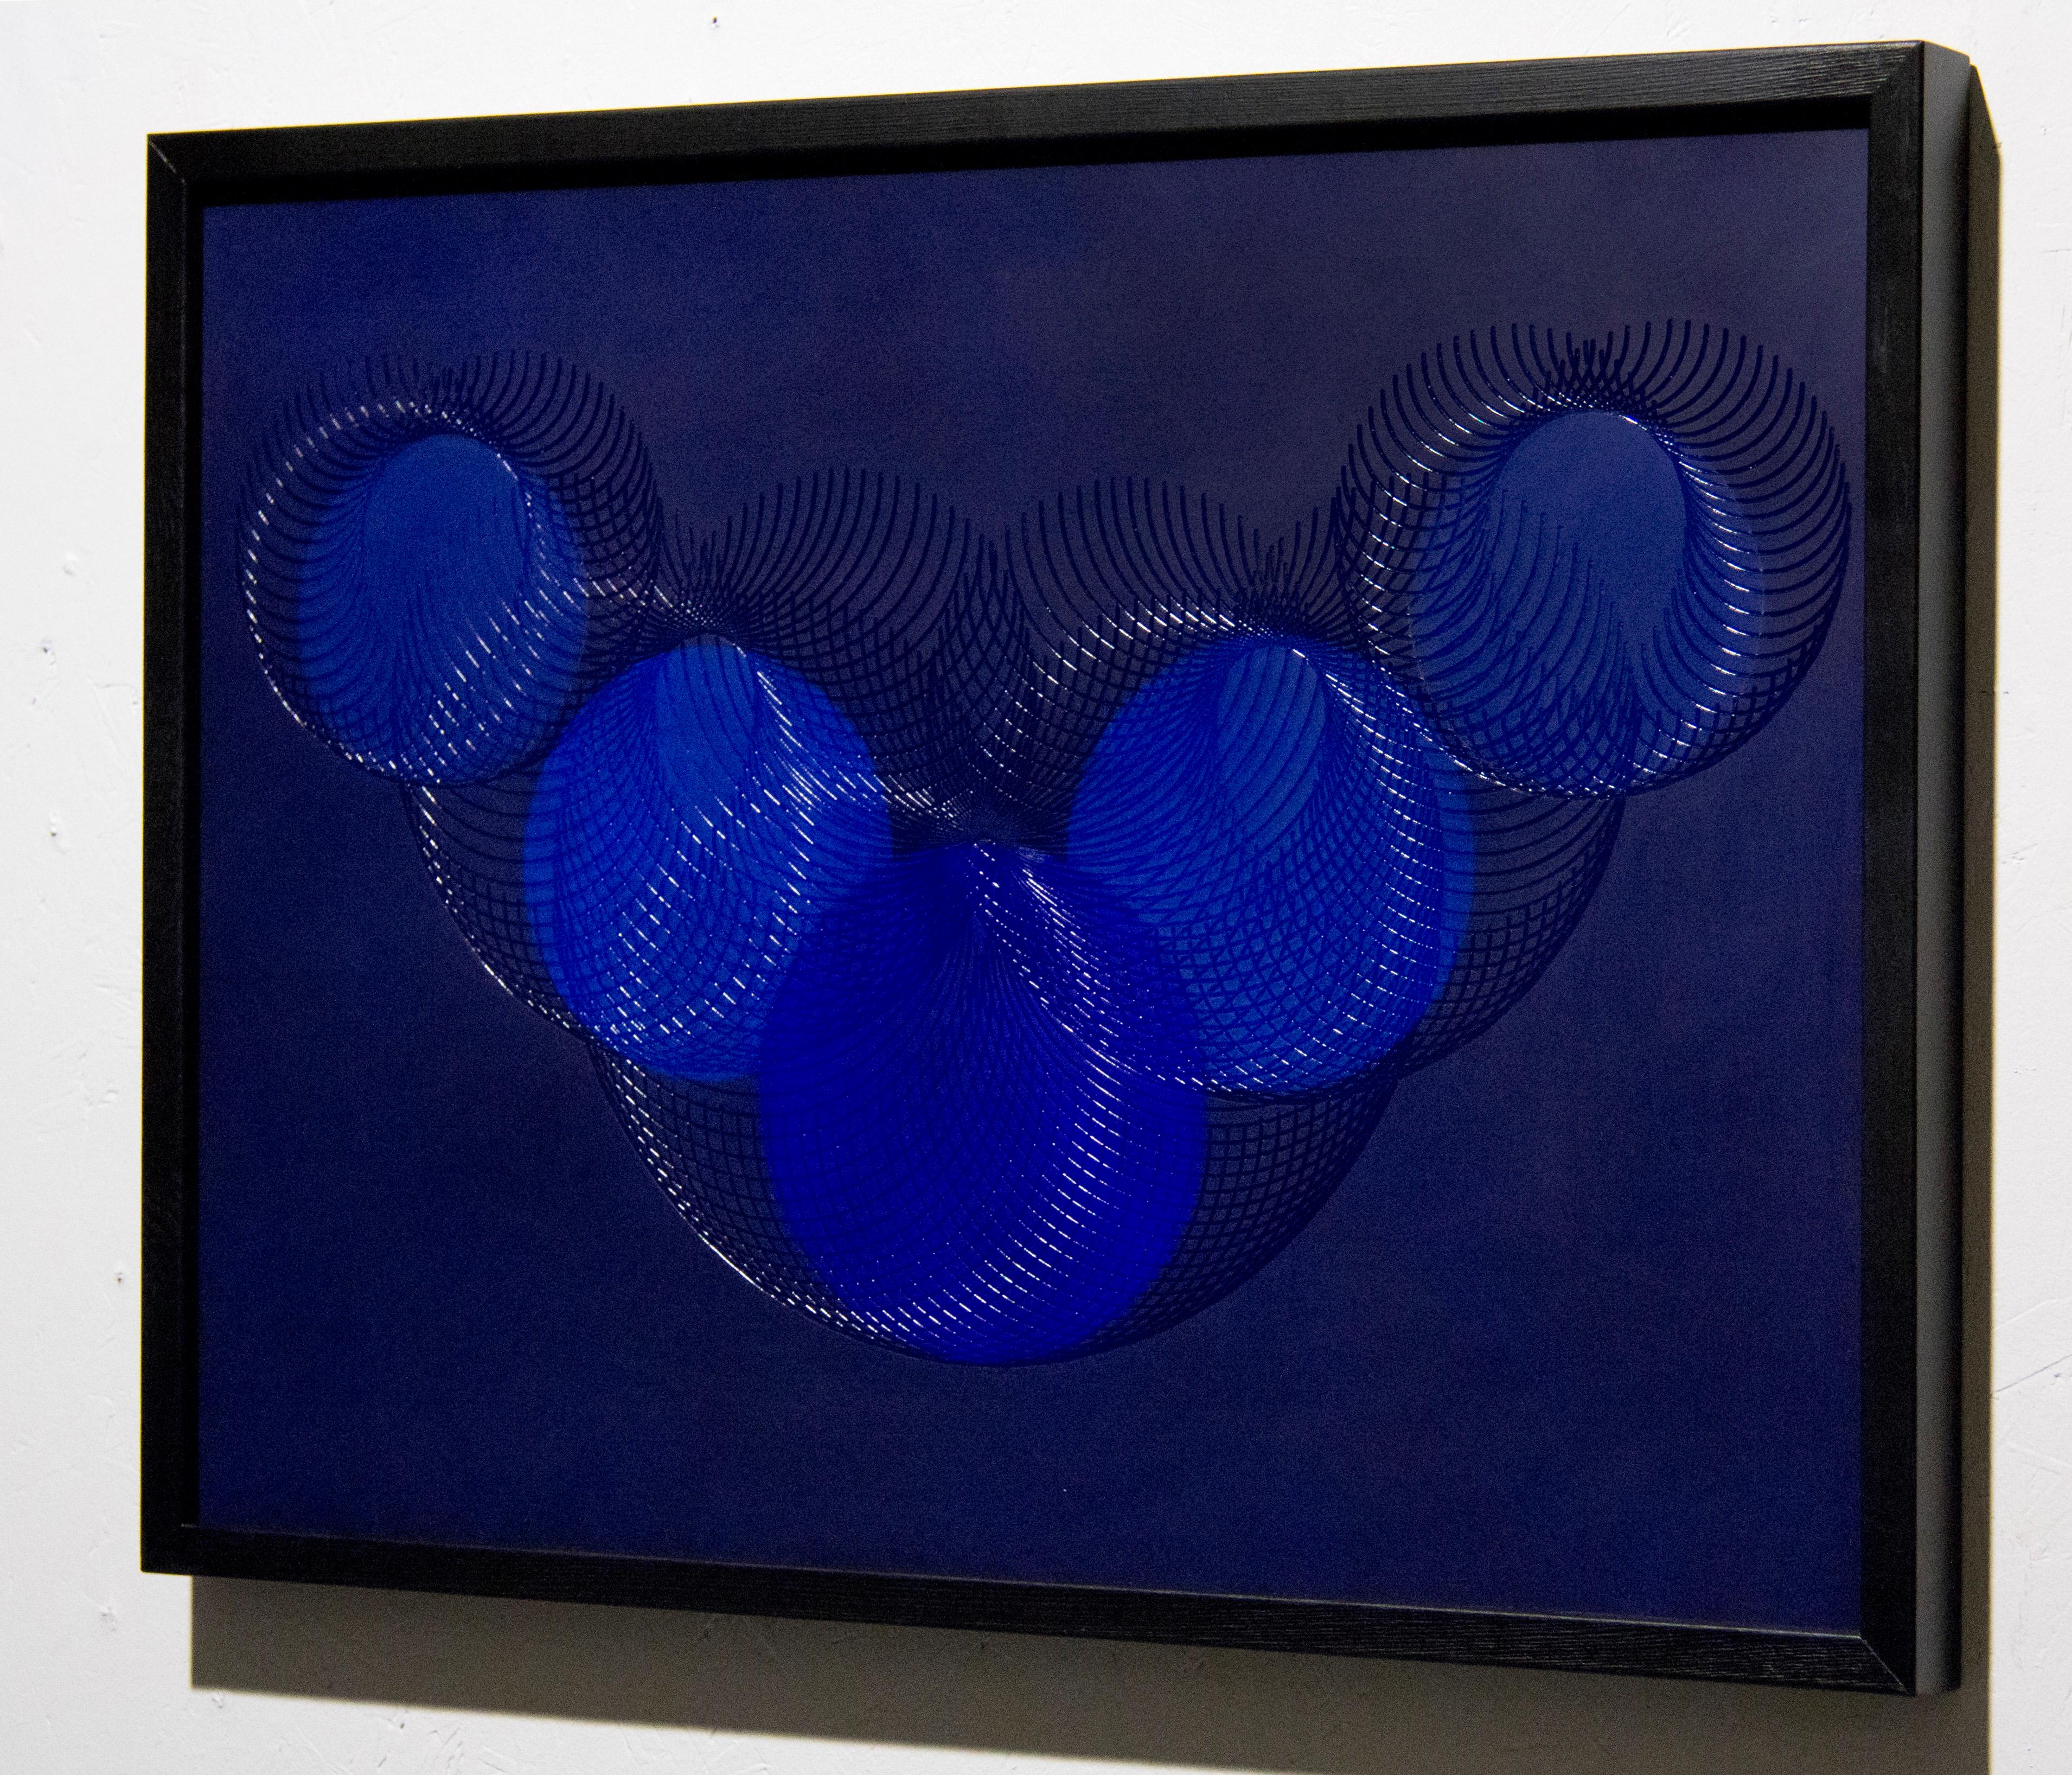 51908- blue circle abstract geometric holographic light drawing on wood panel - Painting by James Minden